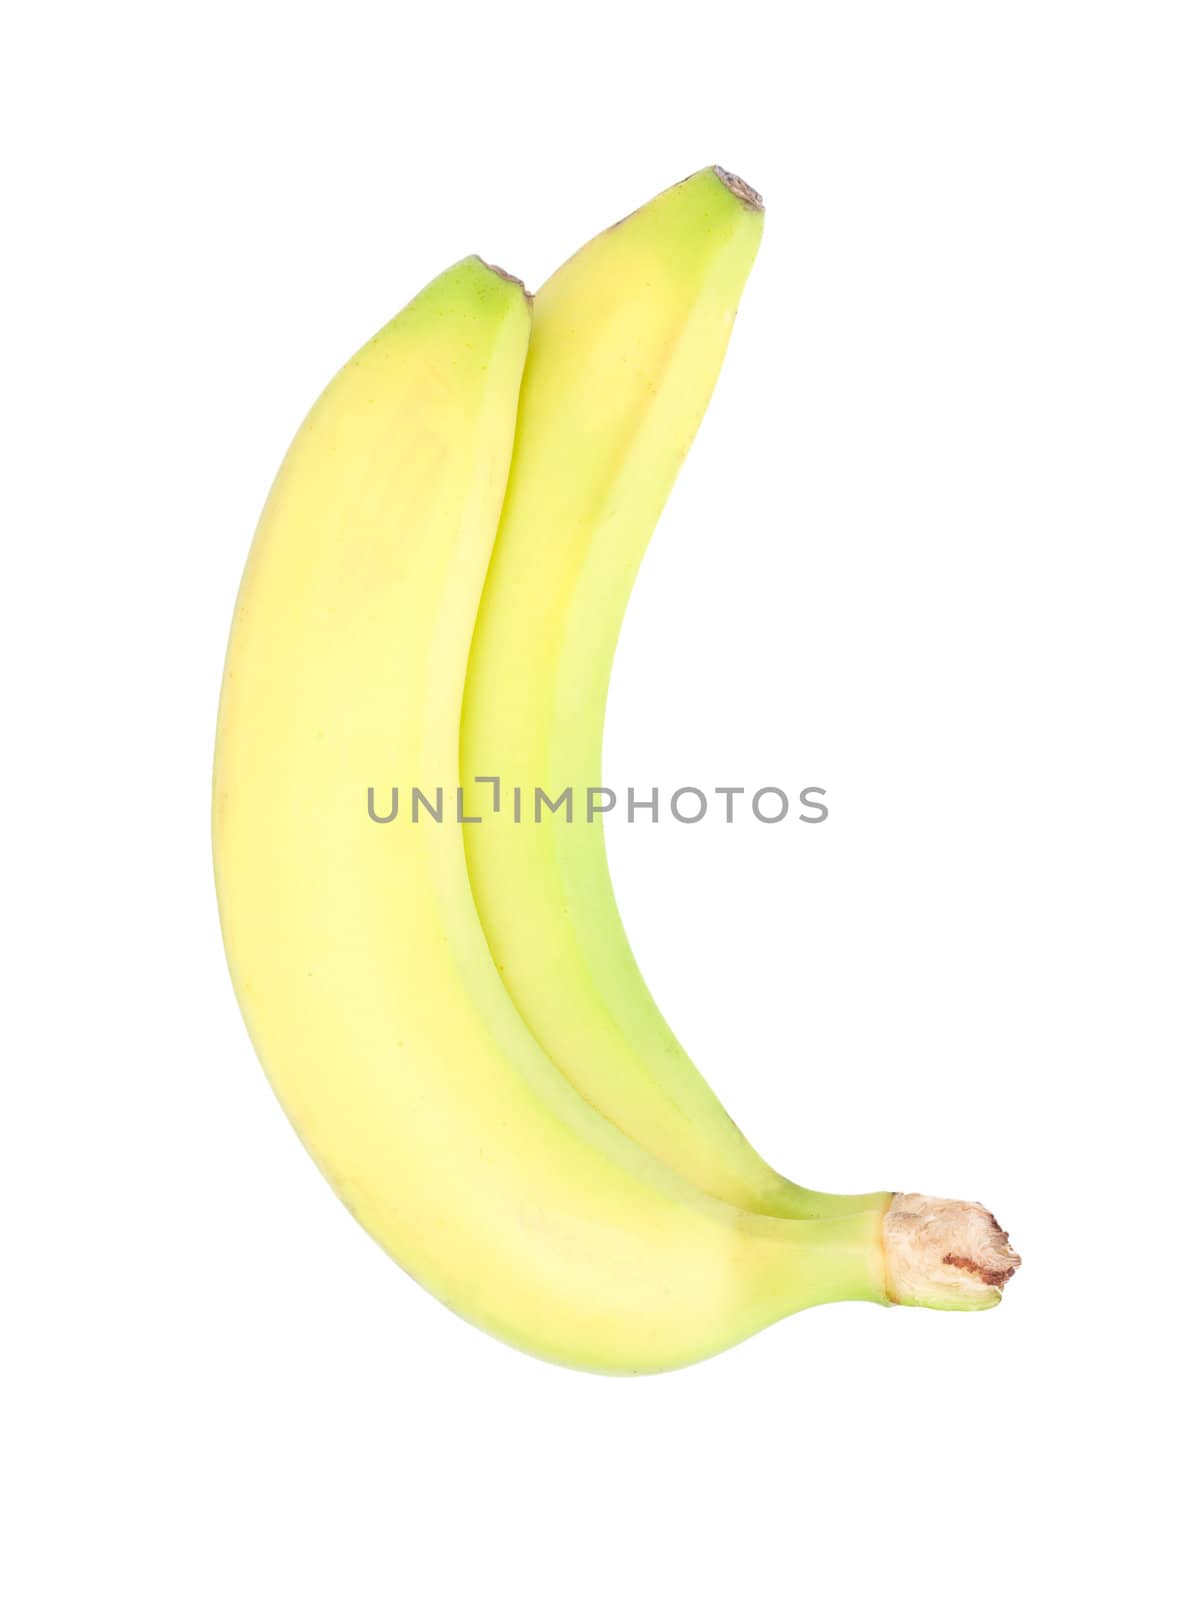 Bunch of bananas isolated on white background 